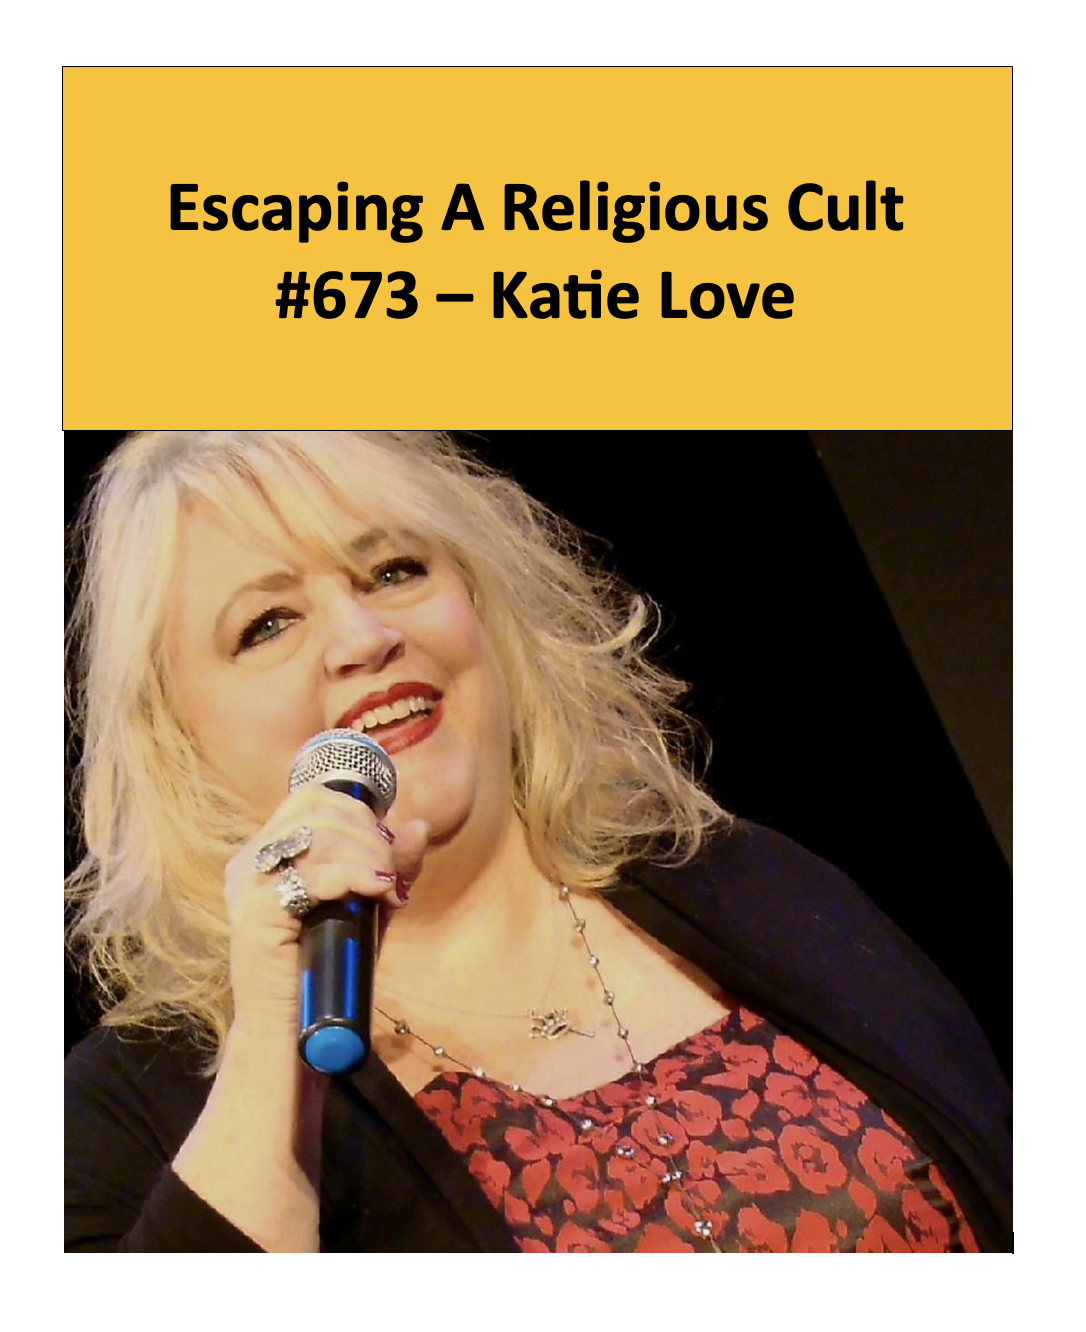 Escaping A Religious Cult - Katie Love - The Mental Illness Happy Hour